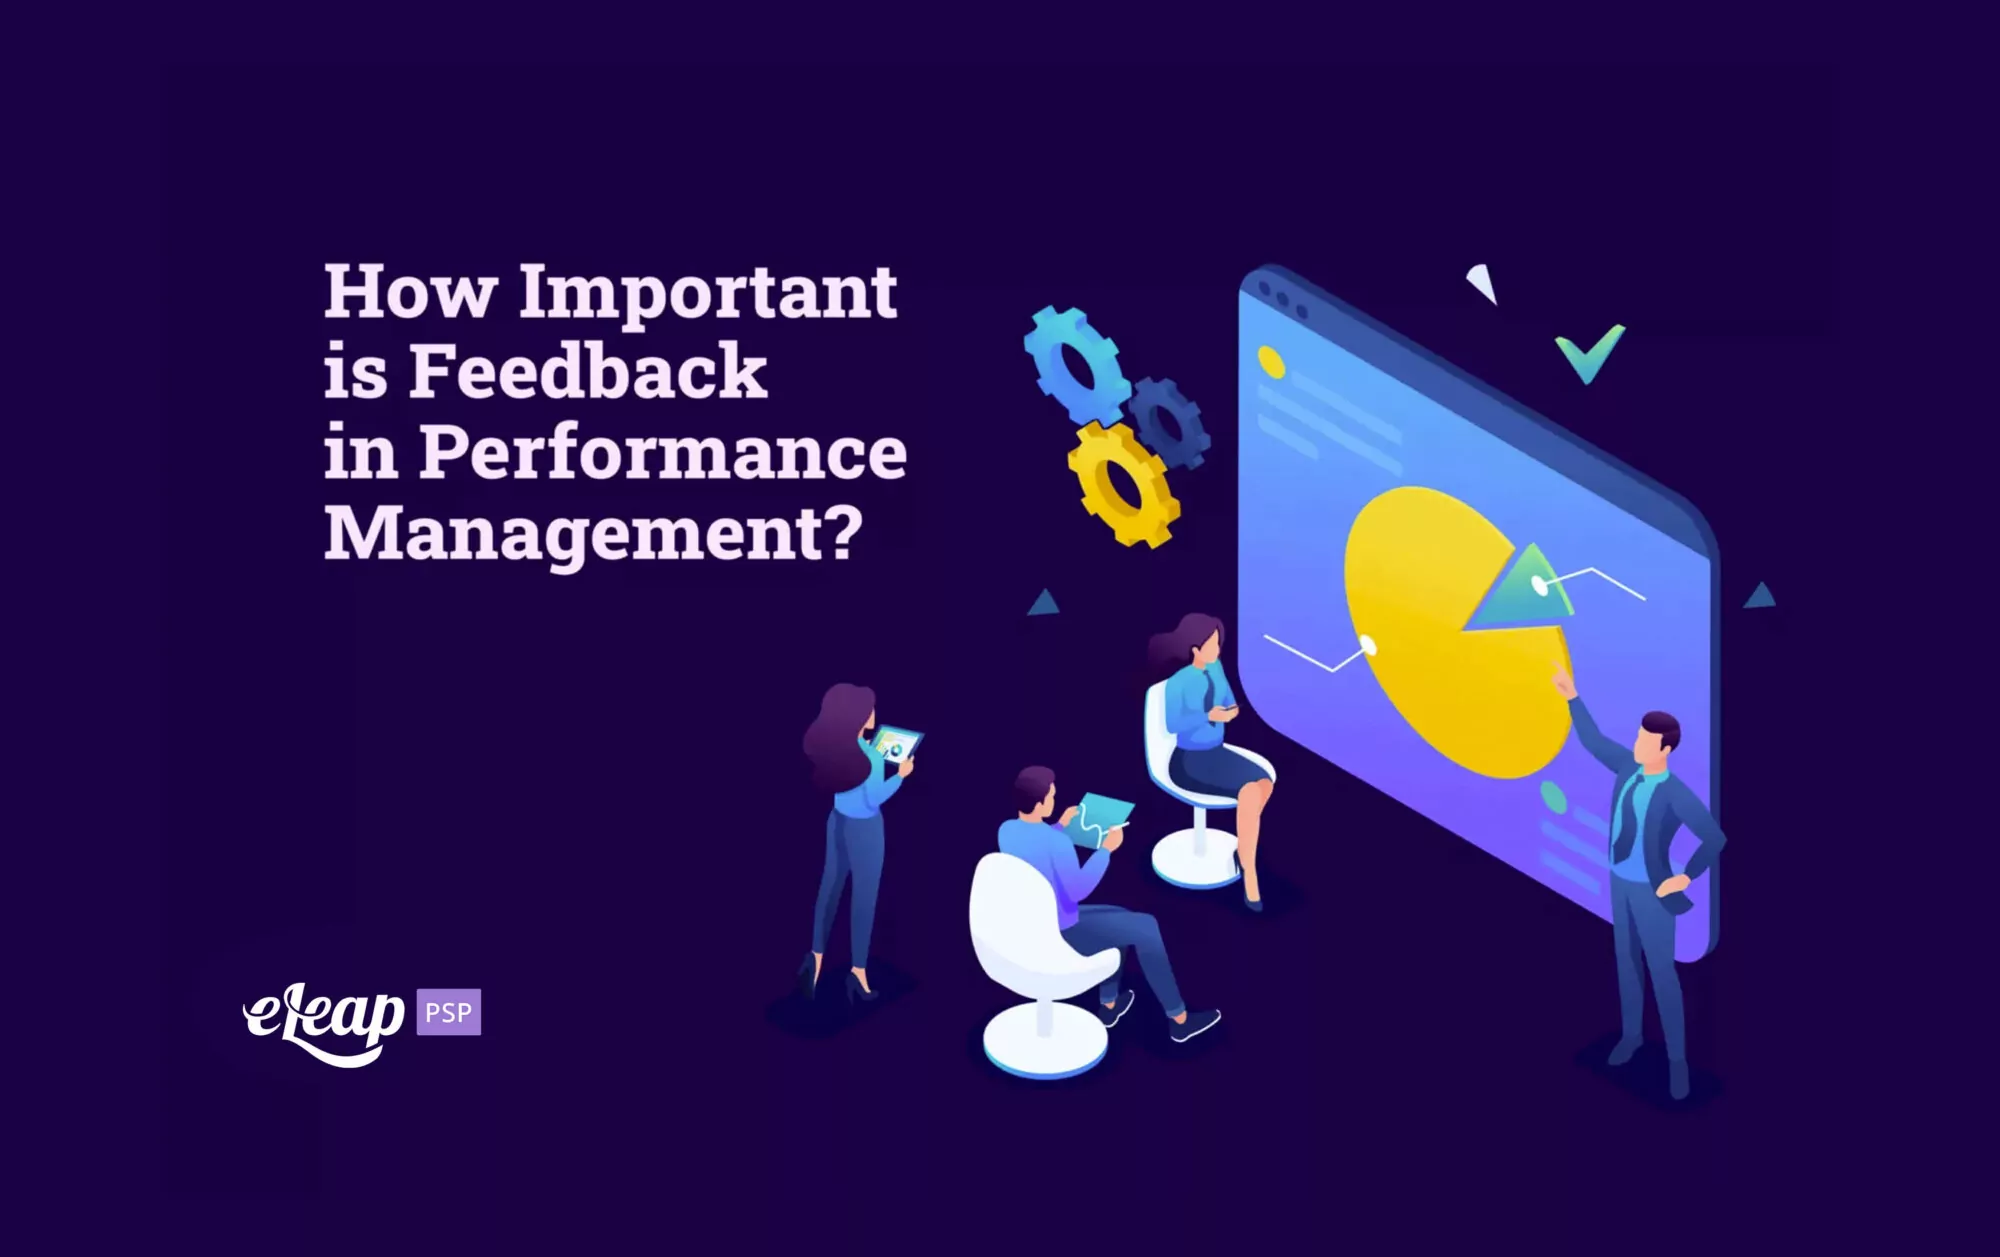 Feedback in Performance Management